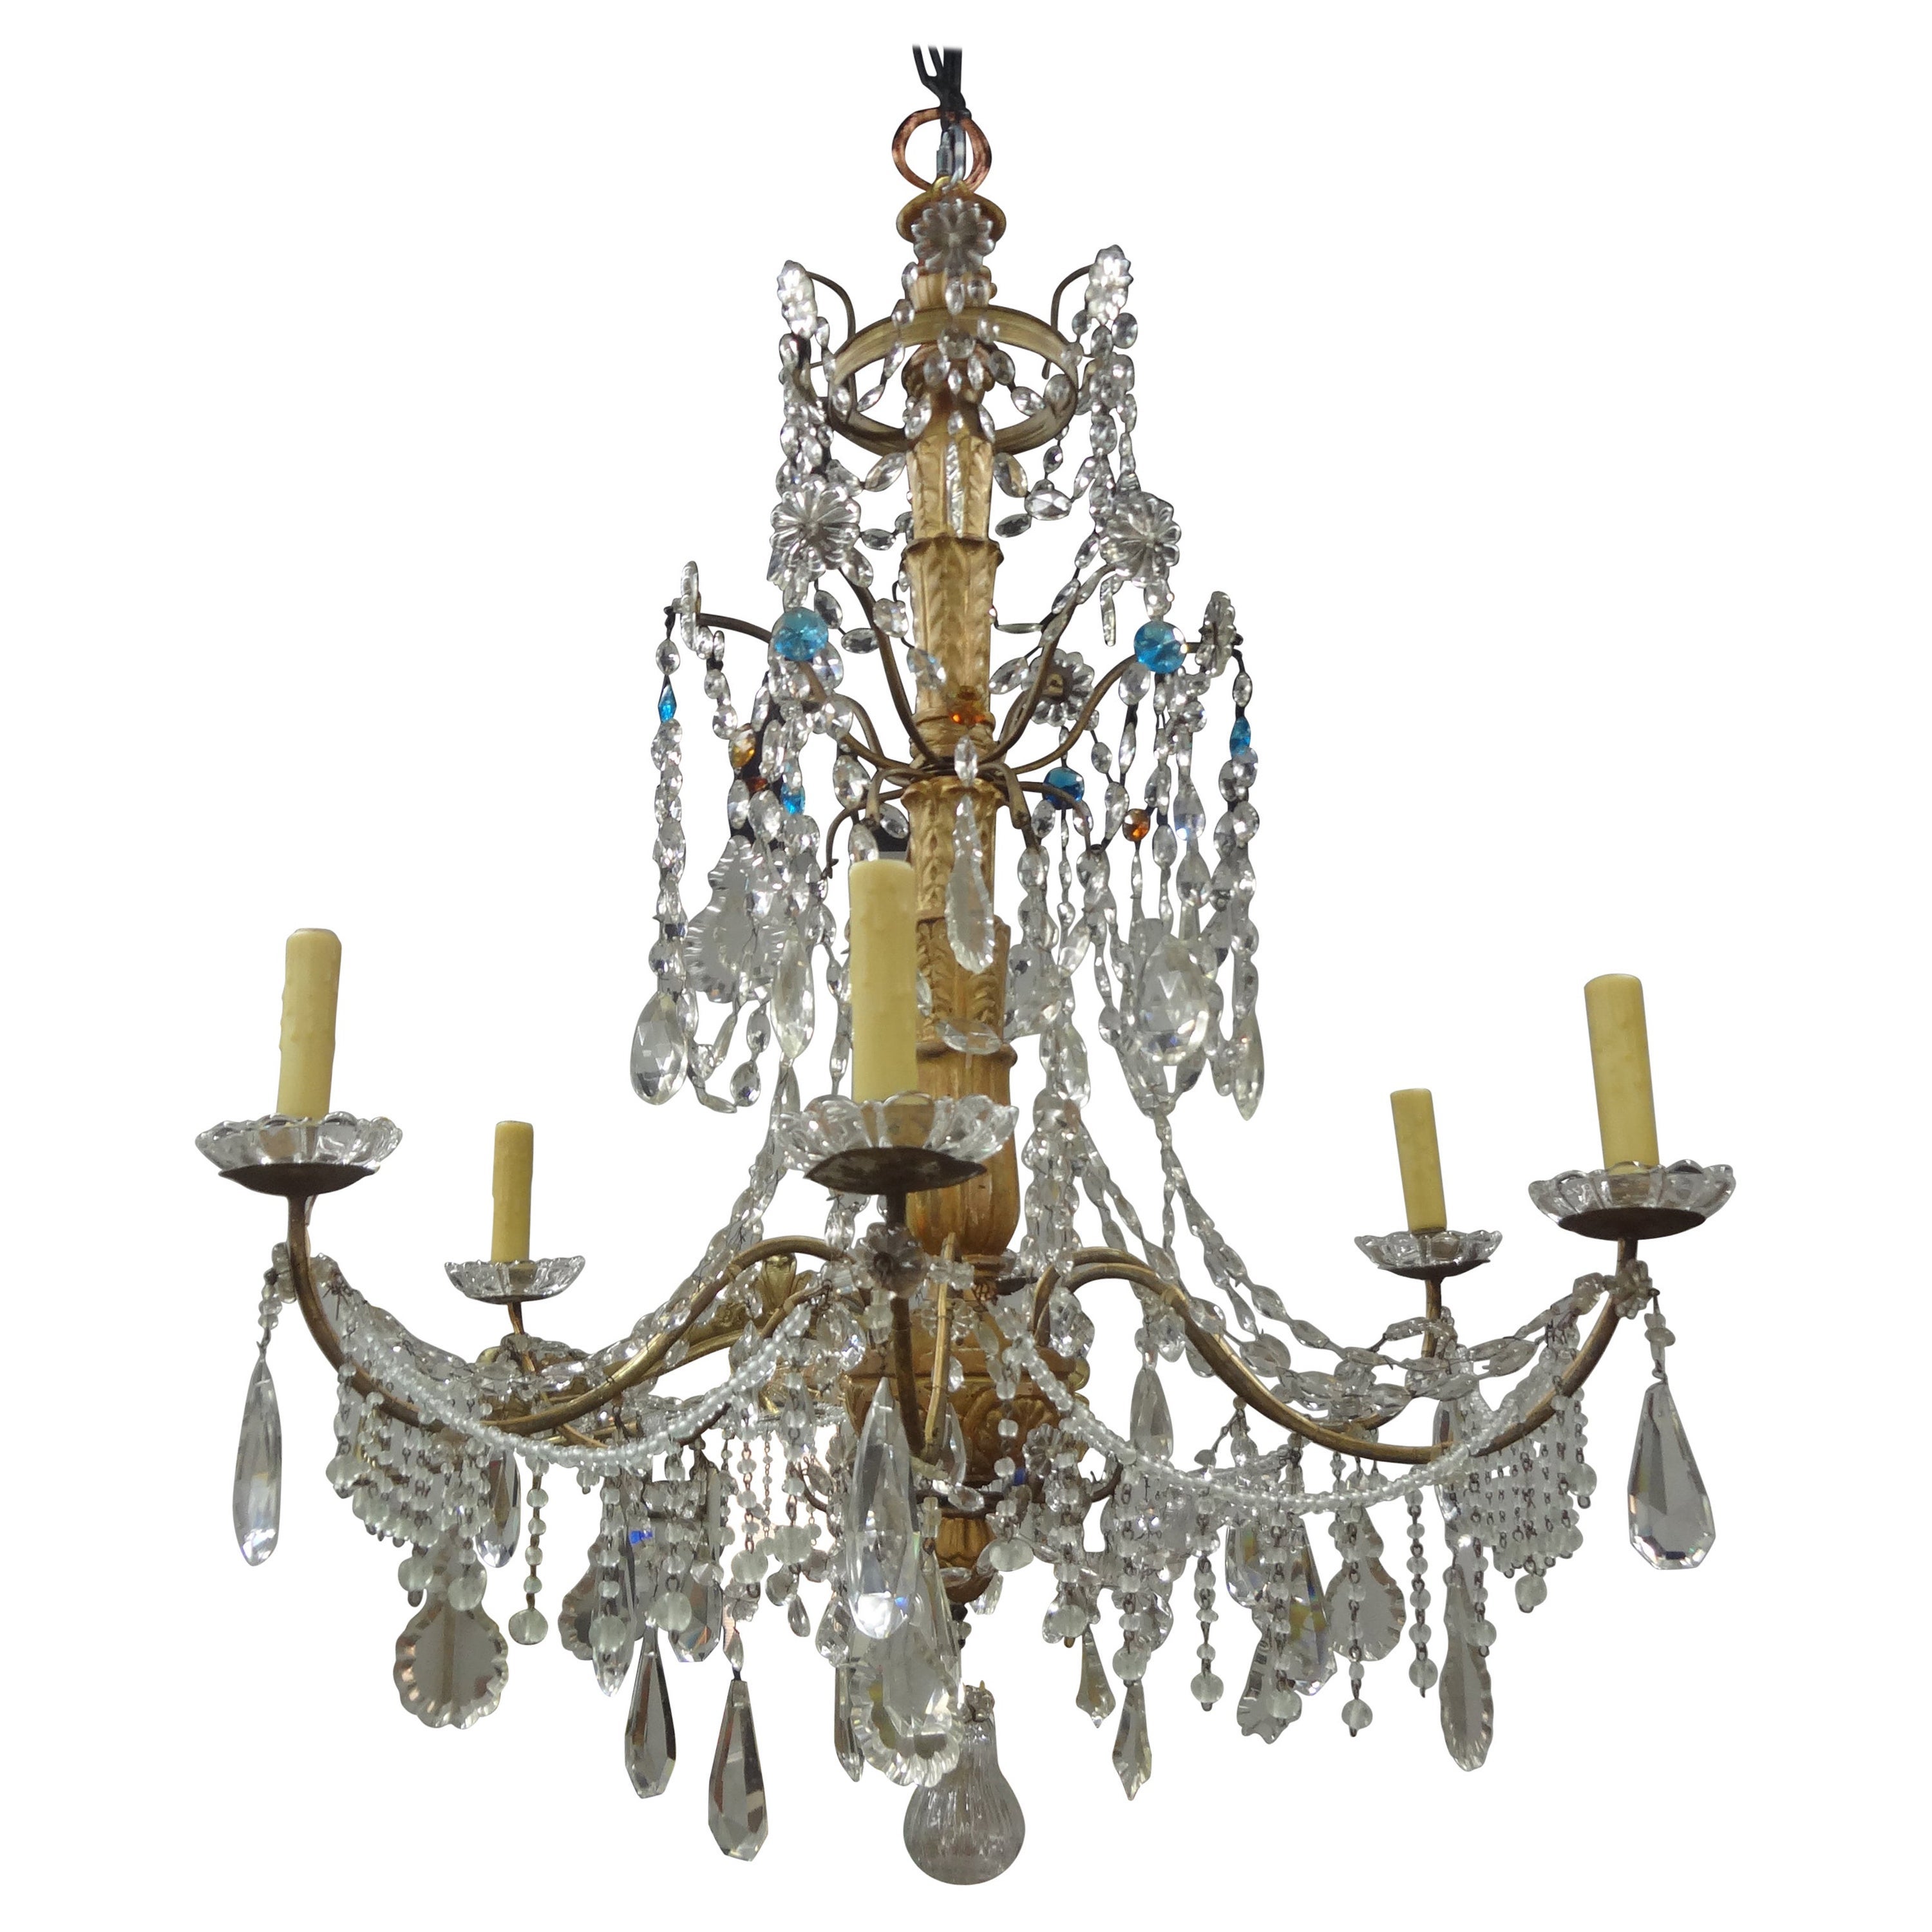 Large 19th Century Italian Genovese Giltwood and Crystal Chandelier